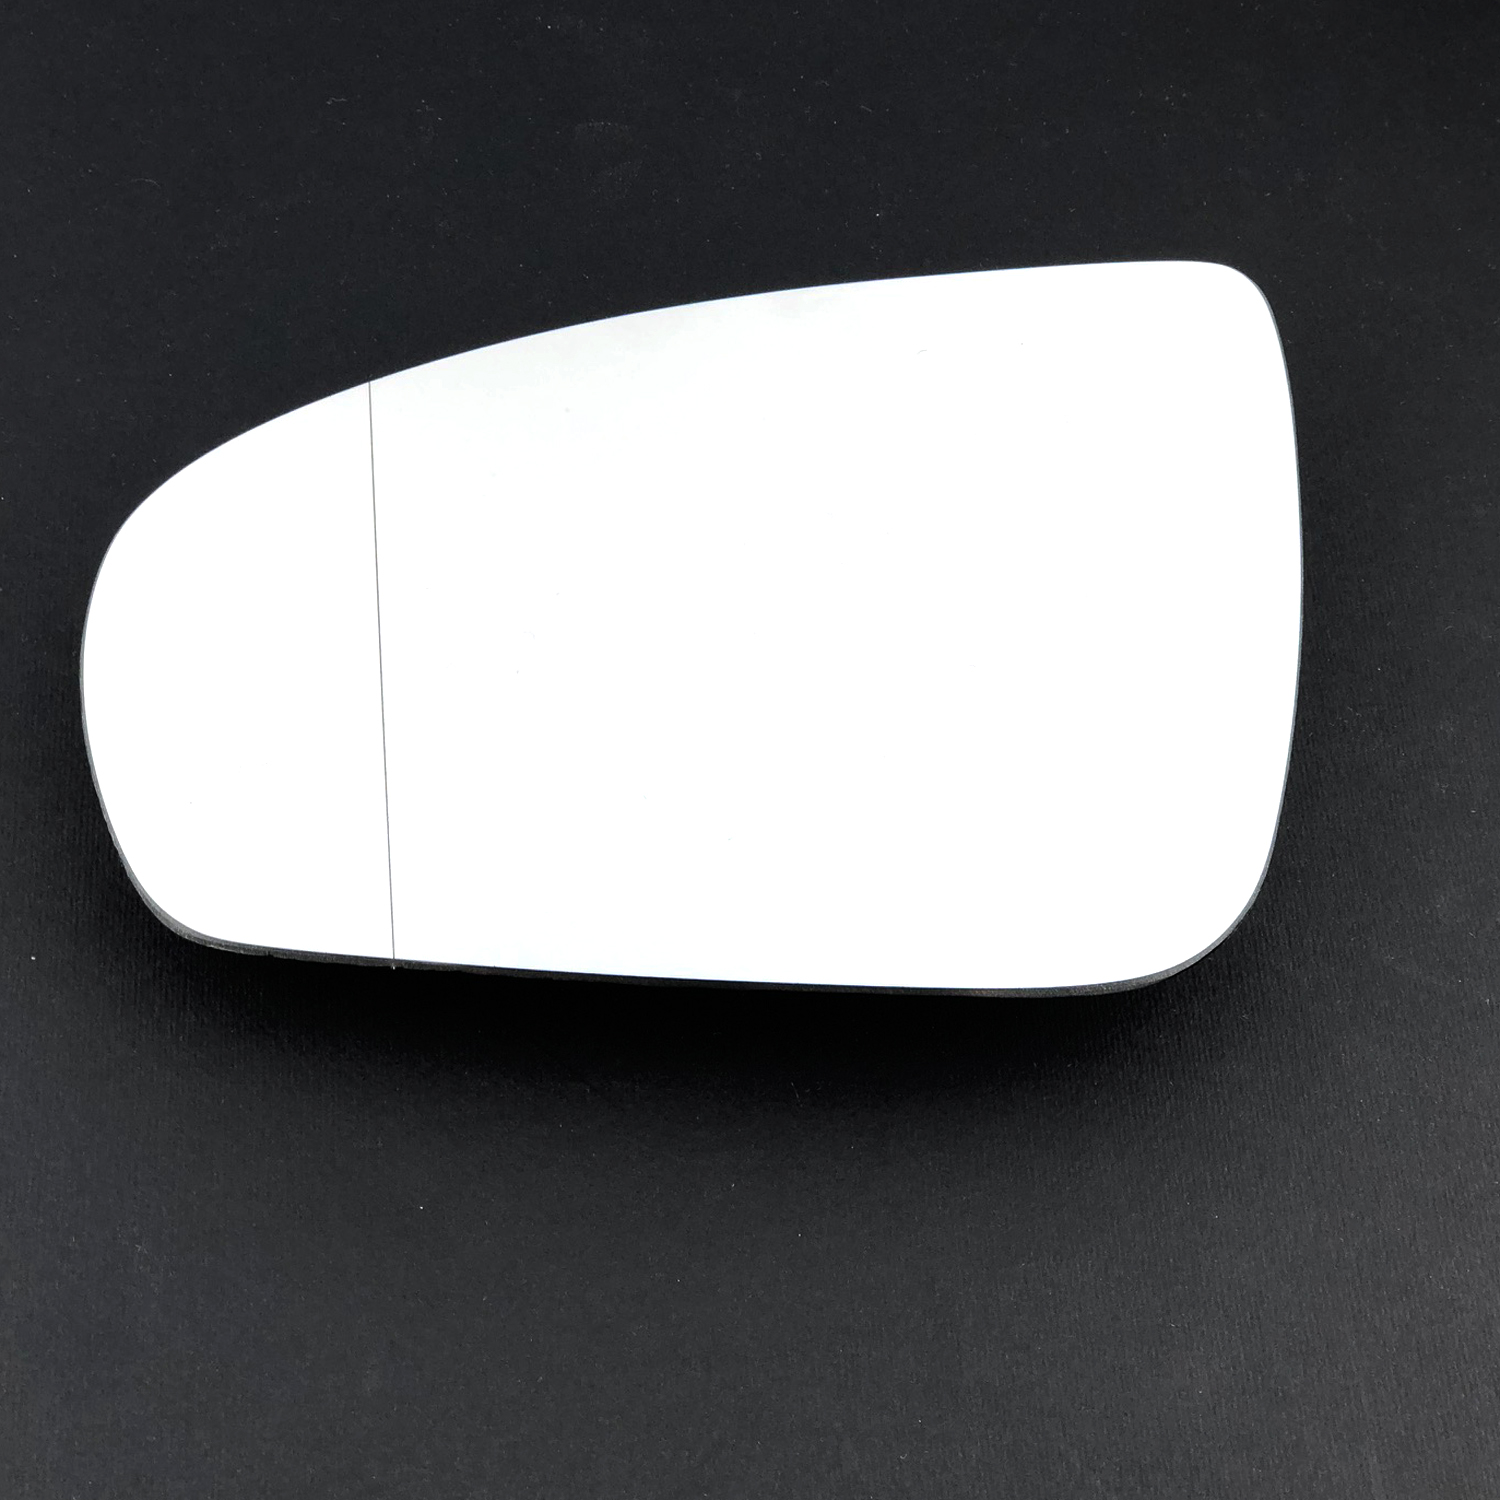 Mercedes CLC Wing Mirror Glass LEFT HAND ( UK Passenger Side ) 2008 to 2011 – Wide Angle Wing Mirror